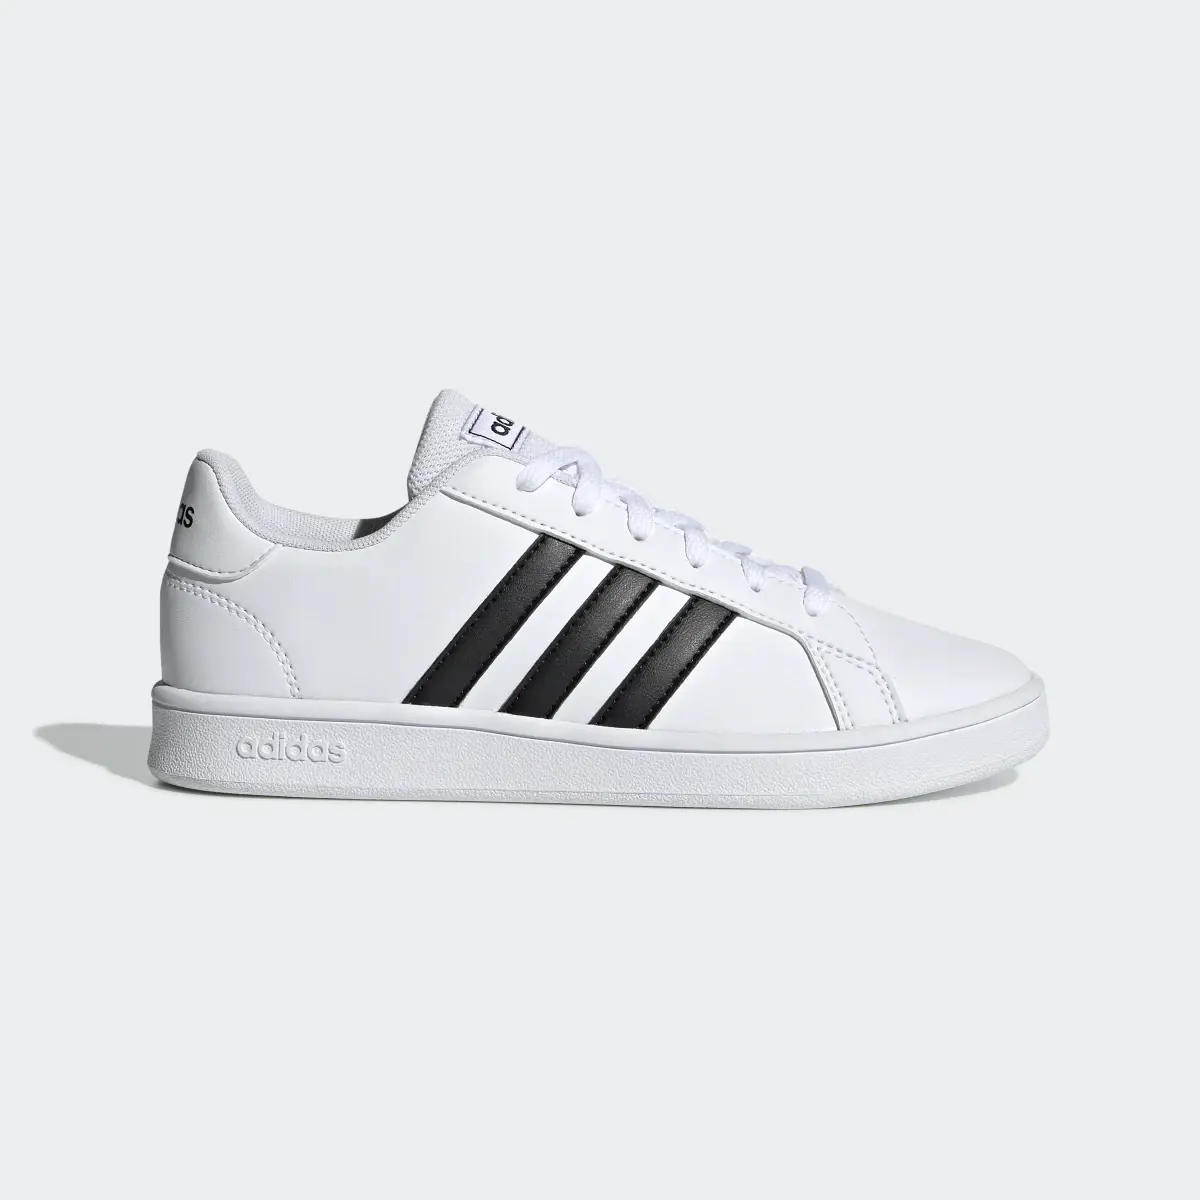 Adidas Grand Court Shoes. 2